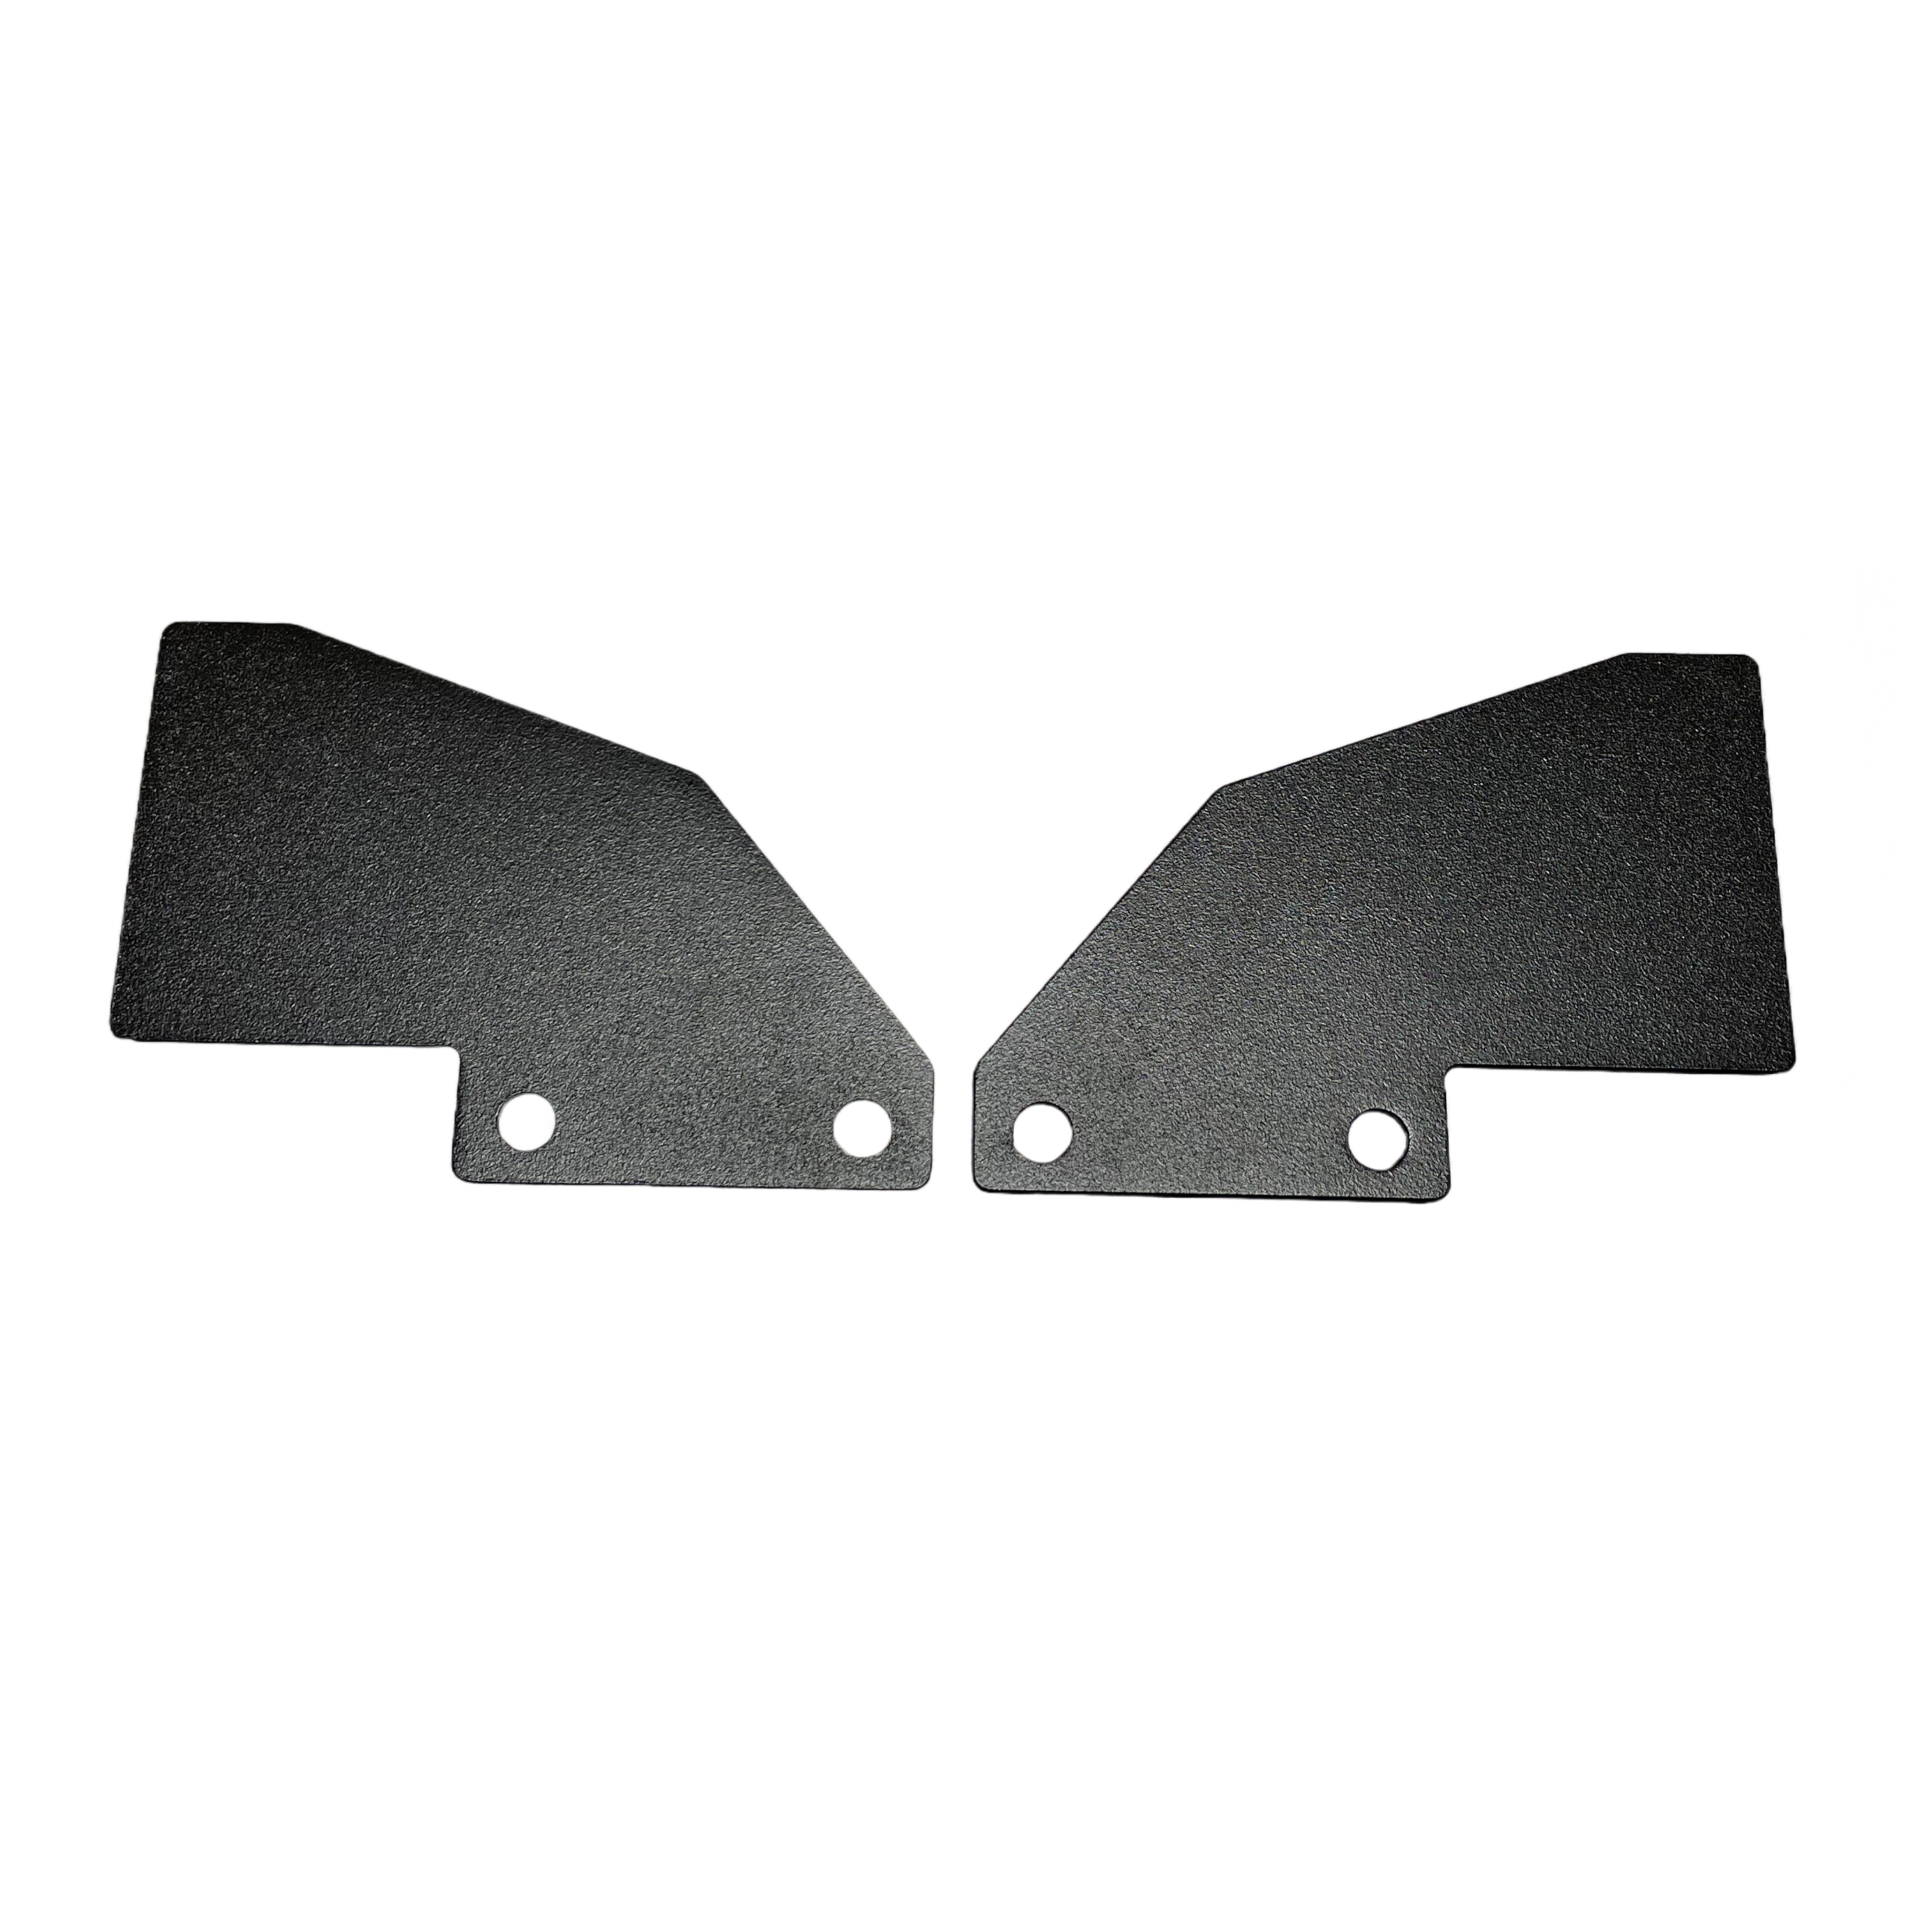 HD Front Inner CV Boot Guards for Yamaha YXZ by FASTLAB